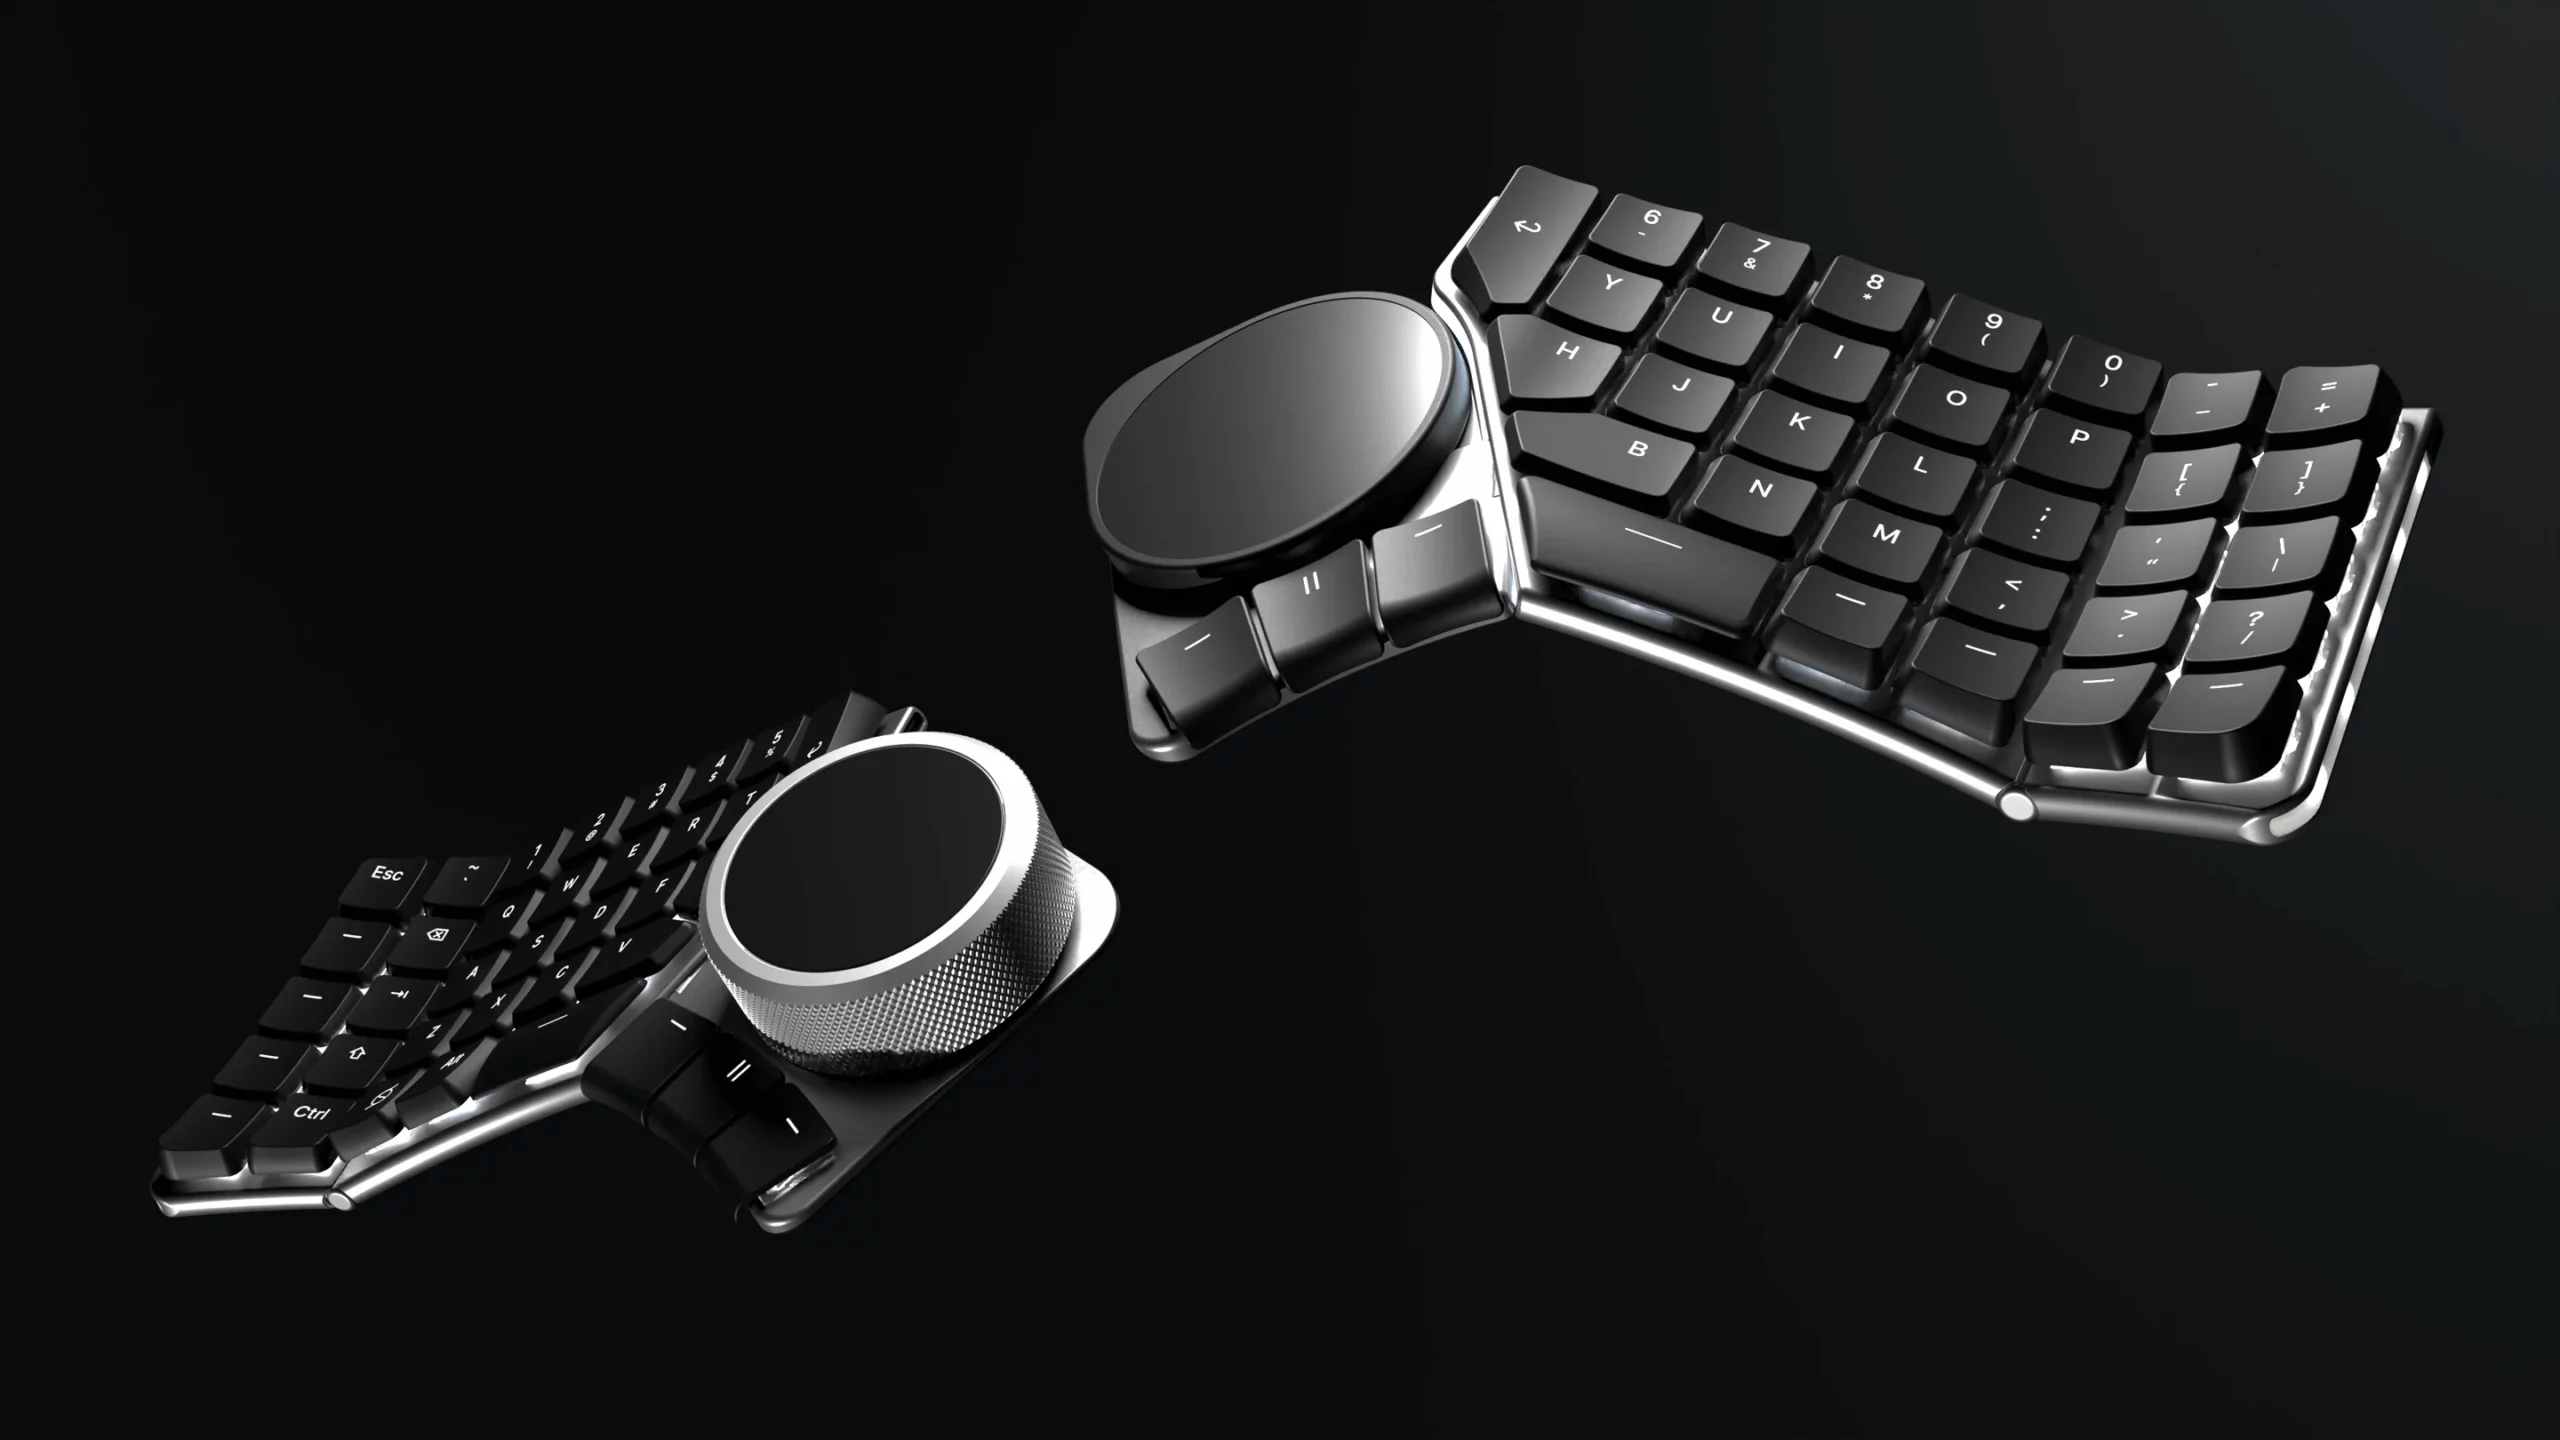 The keyboard that transforms with you.